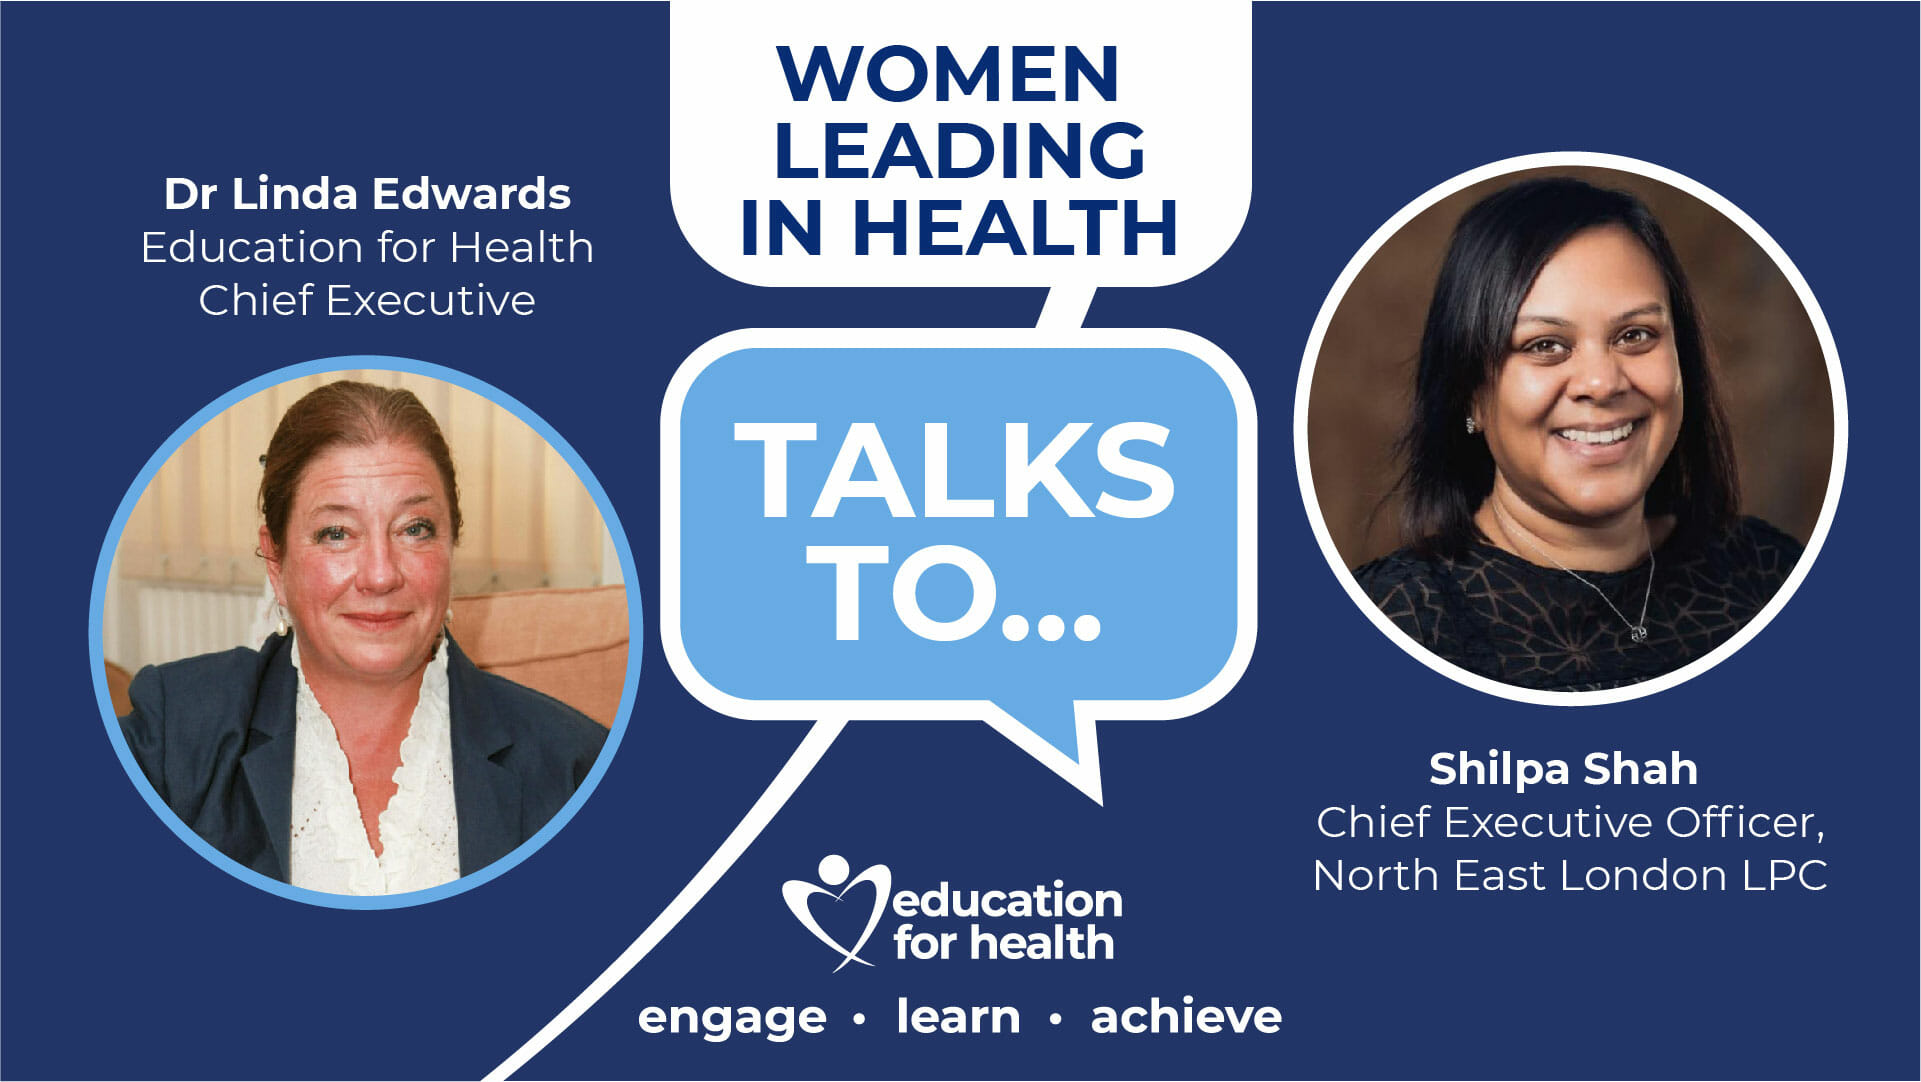 Women leading in health The CEO - Shilpa Shah, Chief Executive Officer, North East London LPC